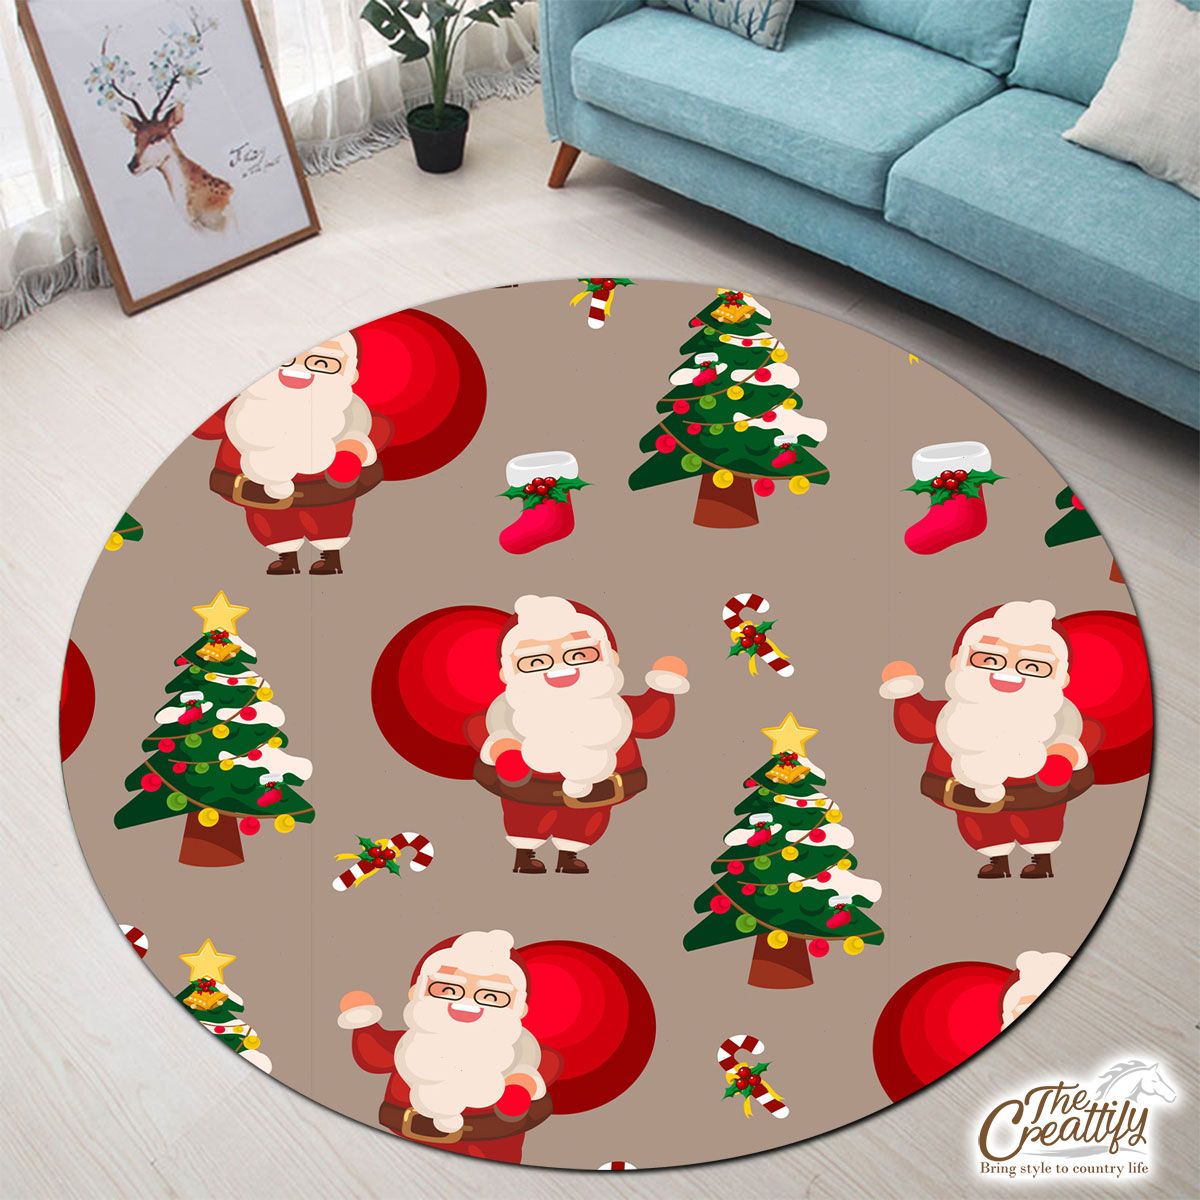 Santa Clause, Chritmas Tree, Candy Cane On Brown Background Round Carpet